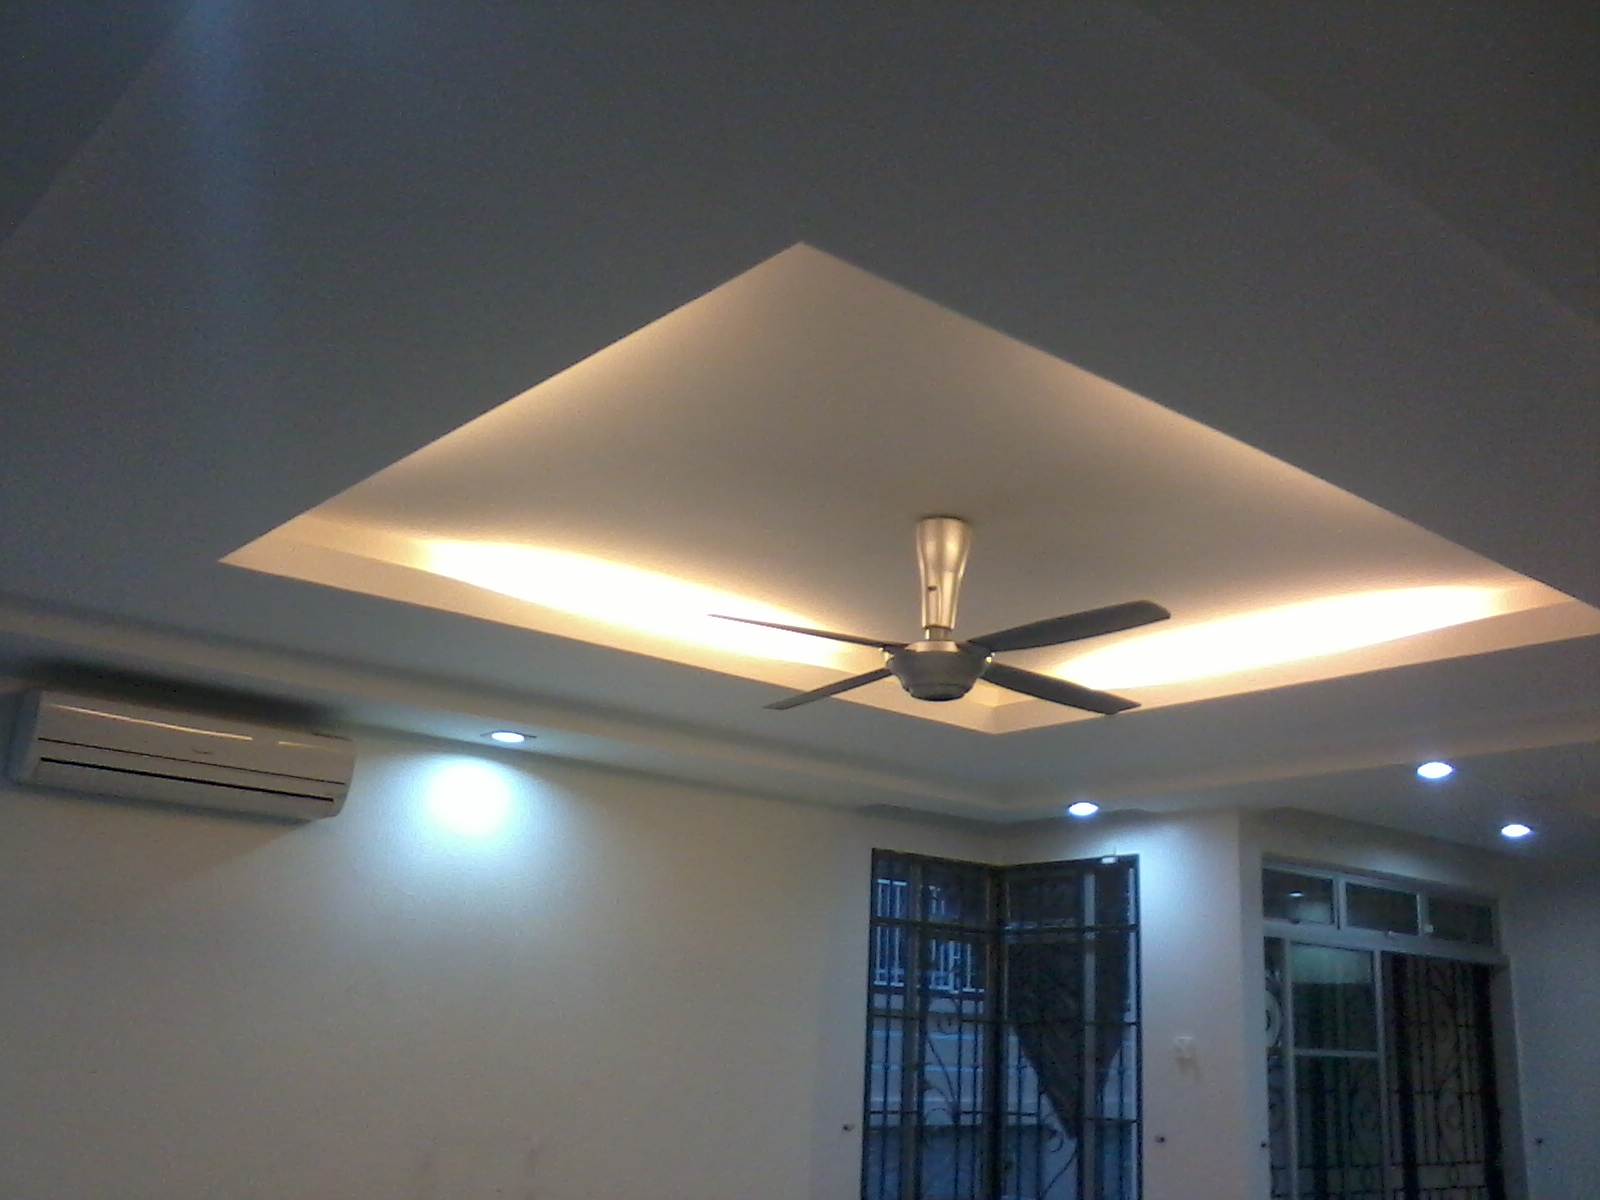 Plaster Siling/Specialist Plaster Ceiling (SBDICE): Plaster siling